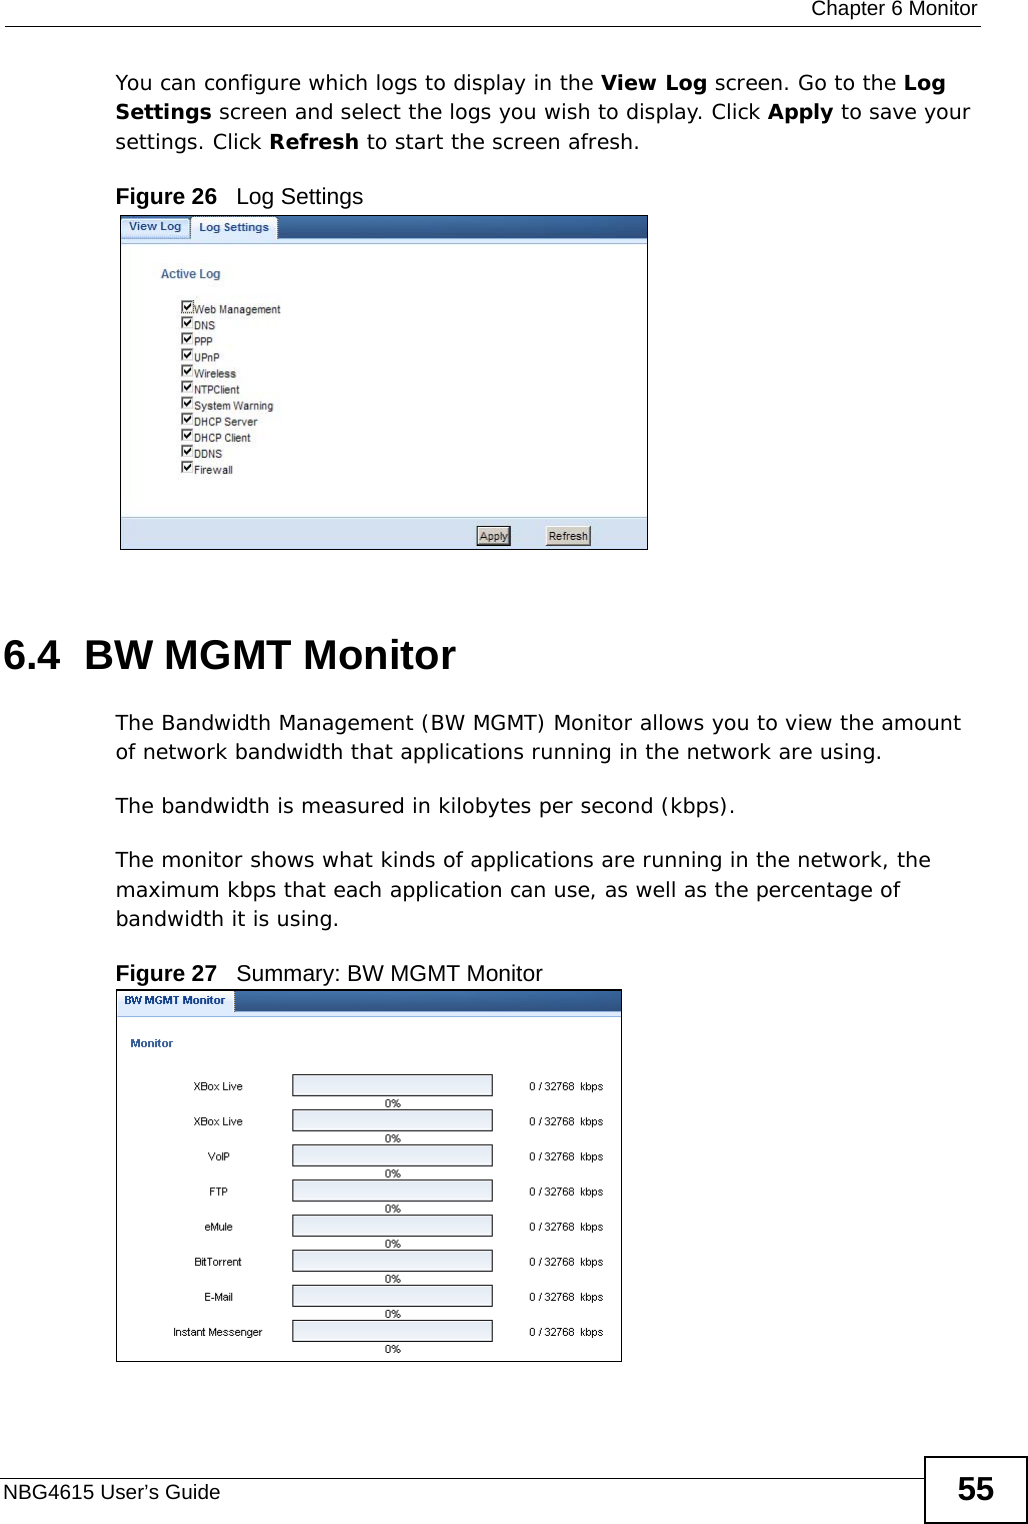  Chapter 6 MonitorNBG4615 User’s Guide 55You can configure which logs to display in the View Log screen. Go to the Log Settings screen and select the logs you wish to display. Click Apply to save your settings. Click Refresh to start the screen afresh.Figure 26   Log Settings6.4  BW MGMT MonitorThe Bandwidth Management (BW MGMT) Monitor allows you to view the amount of network bandwidth that applications running in the network are using.The bandwidth is measured in kilobytes per second (kbps). The monitor shows what kinds of applications are running in the network, the maximum kbps that each application can use, as well as the percentage of bandwidth it is using. Figure 27   Summary: BW MGMT Monitor